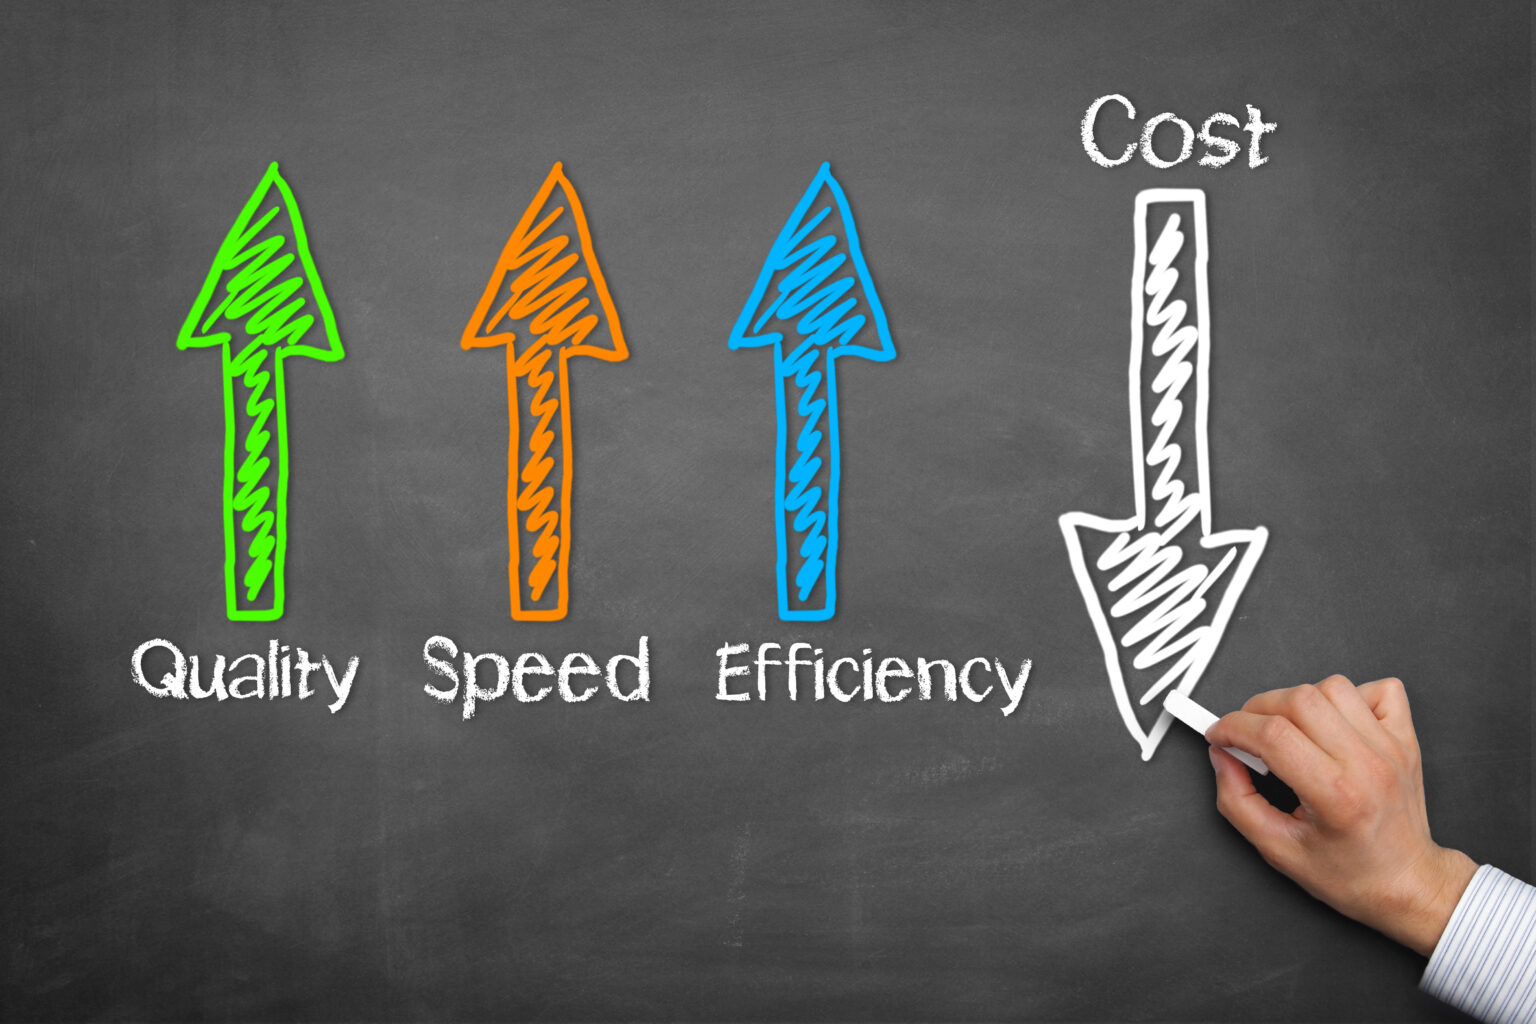 Reduce business costs through automation